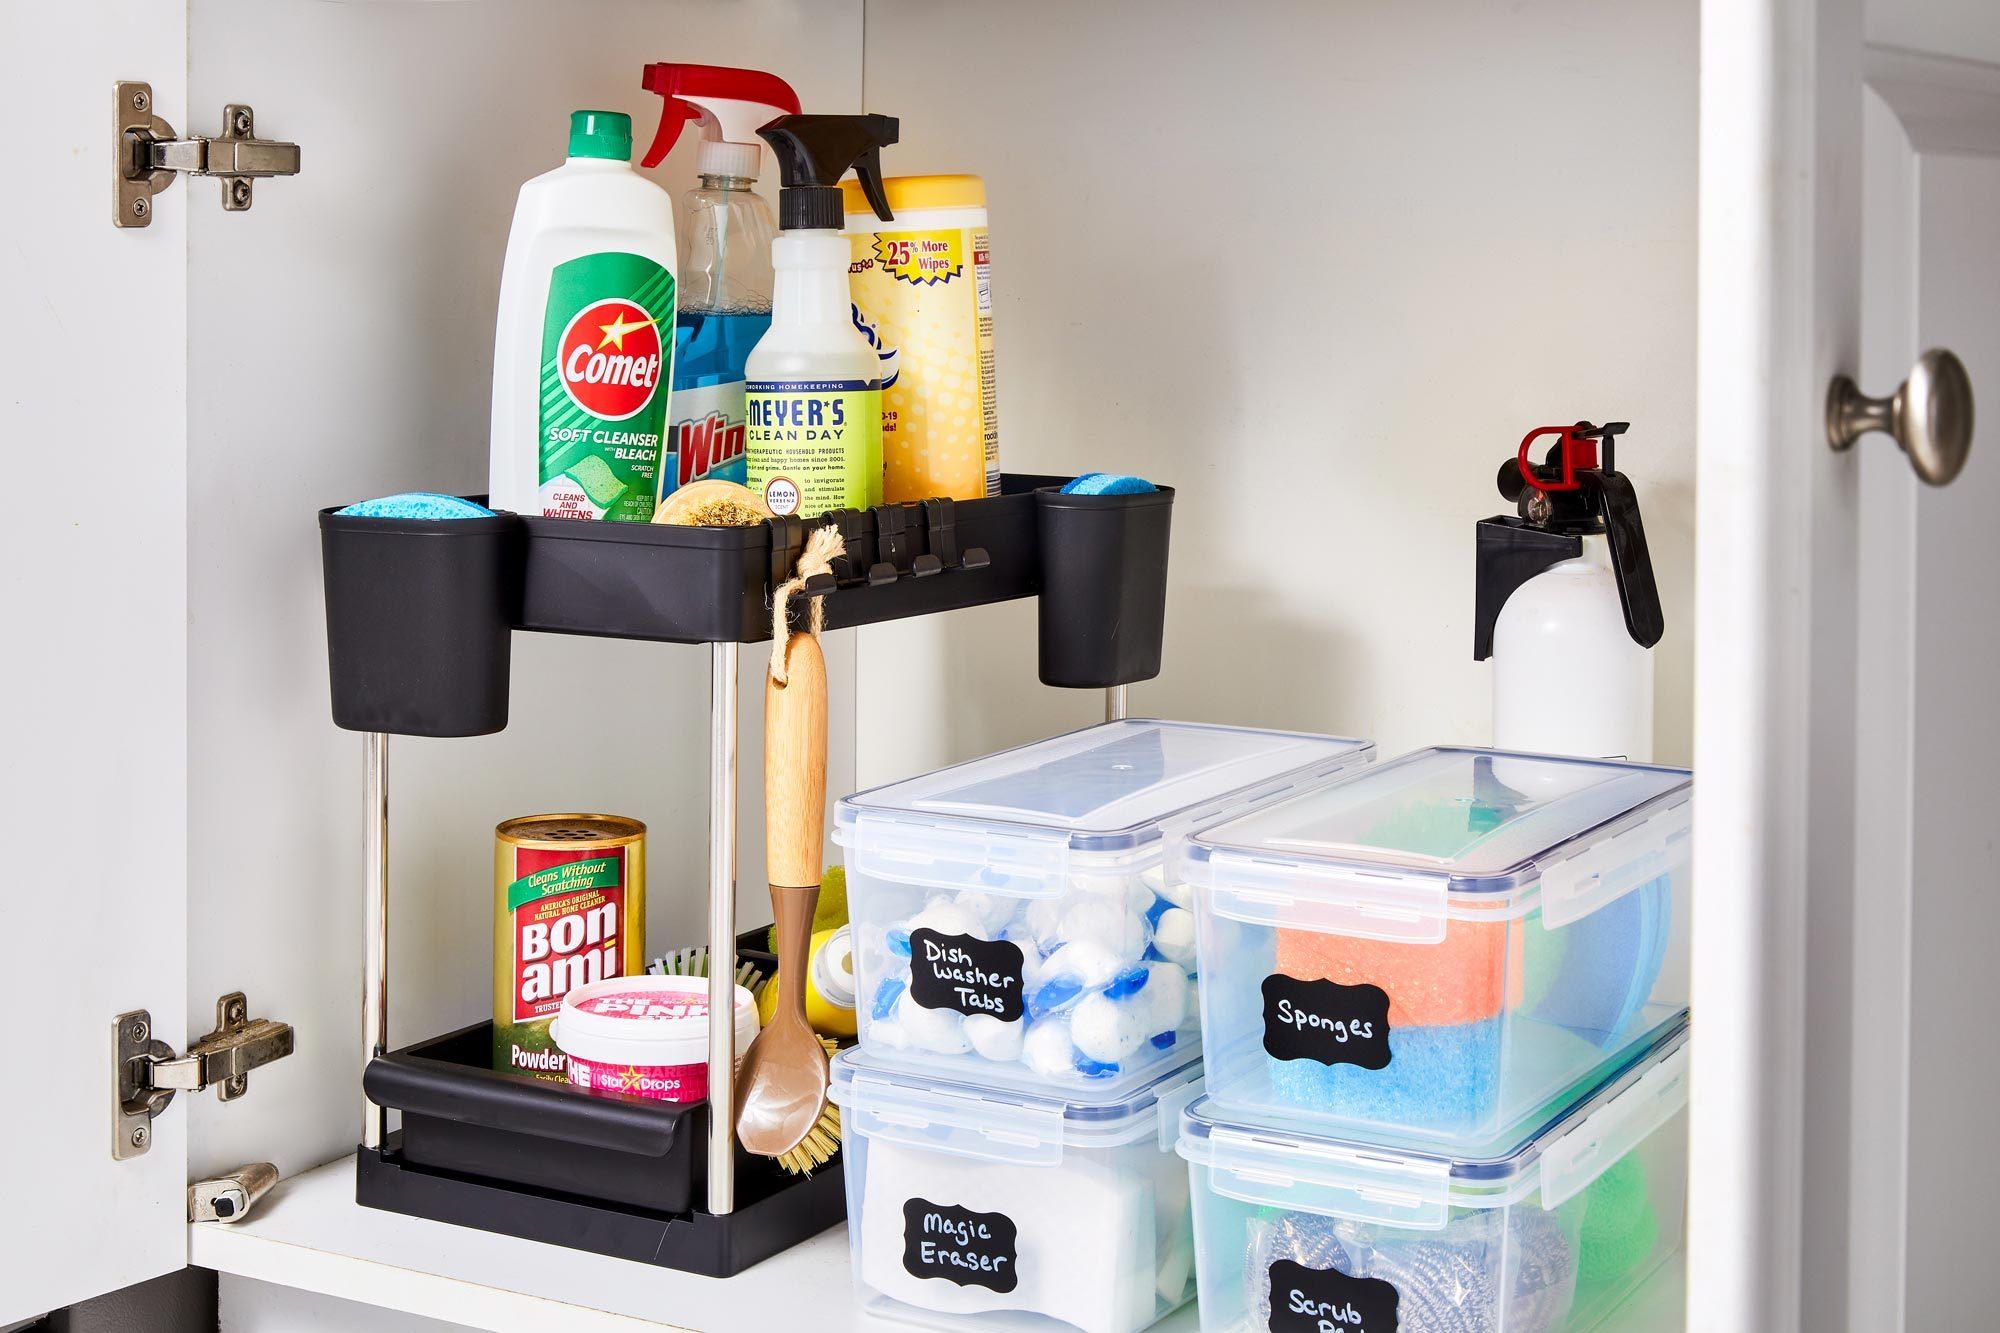 5 Easy Steps to Organize Under Your Kitchen Sink Once and For All -  Practical Perfection